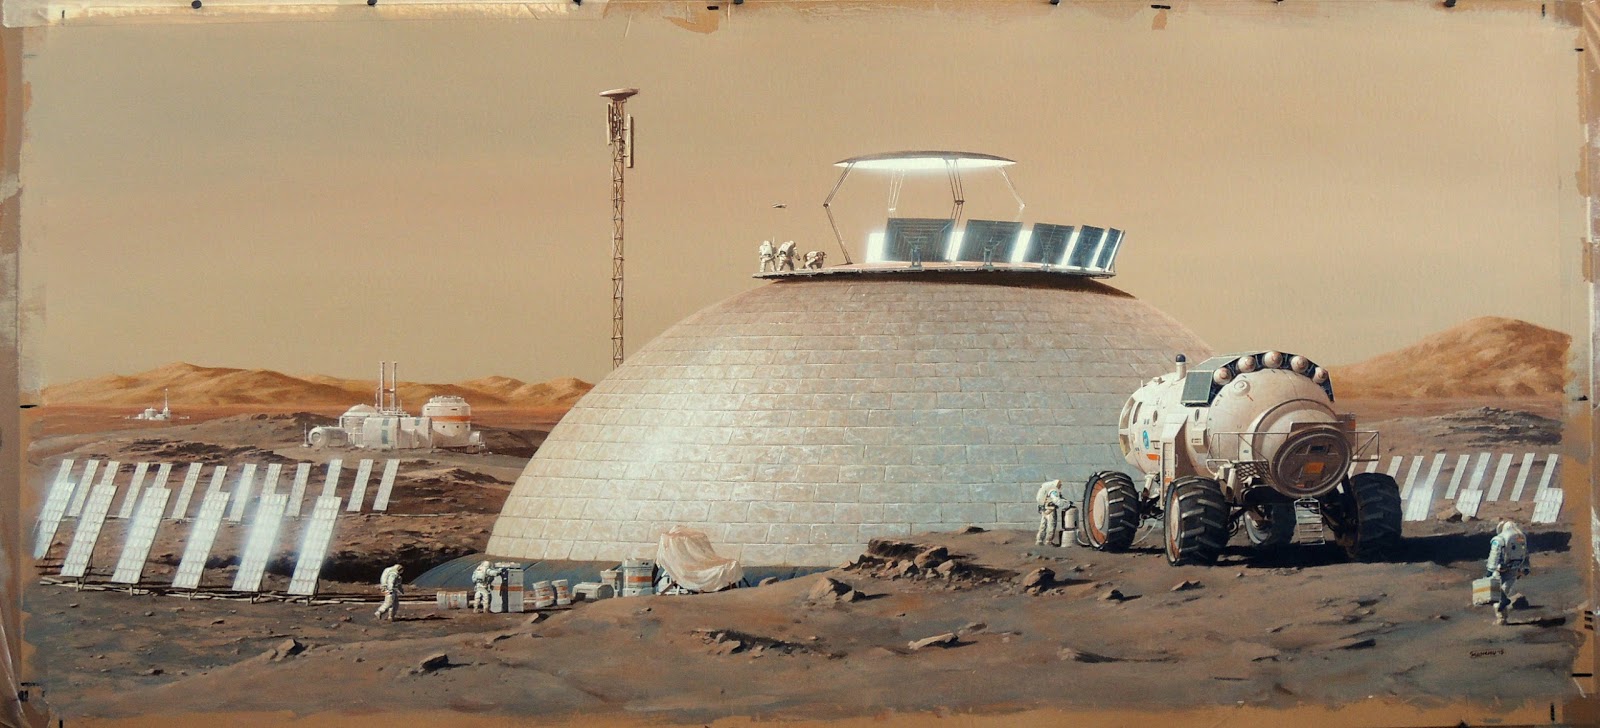 Mars base with dome over a chasm near Ascraeus Mons